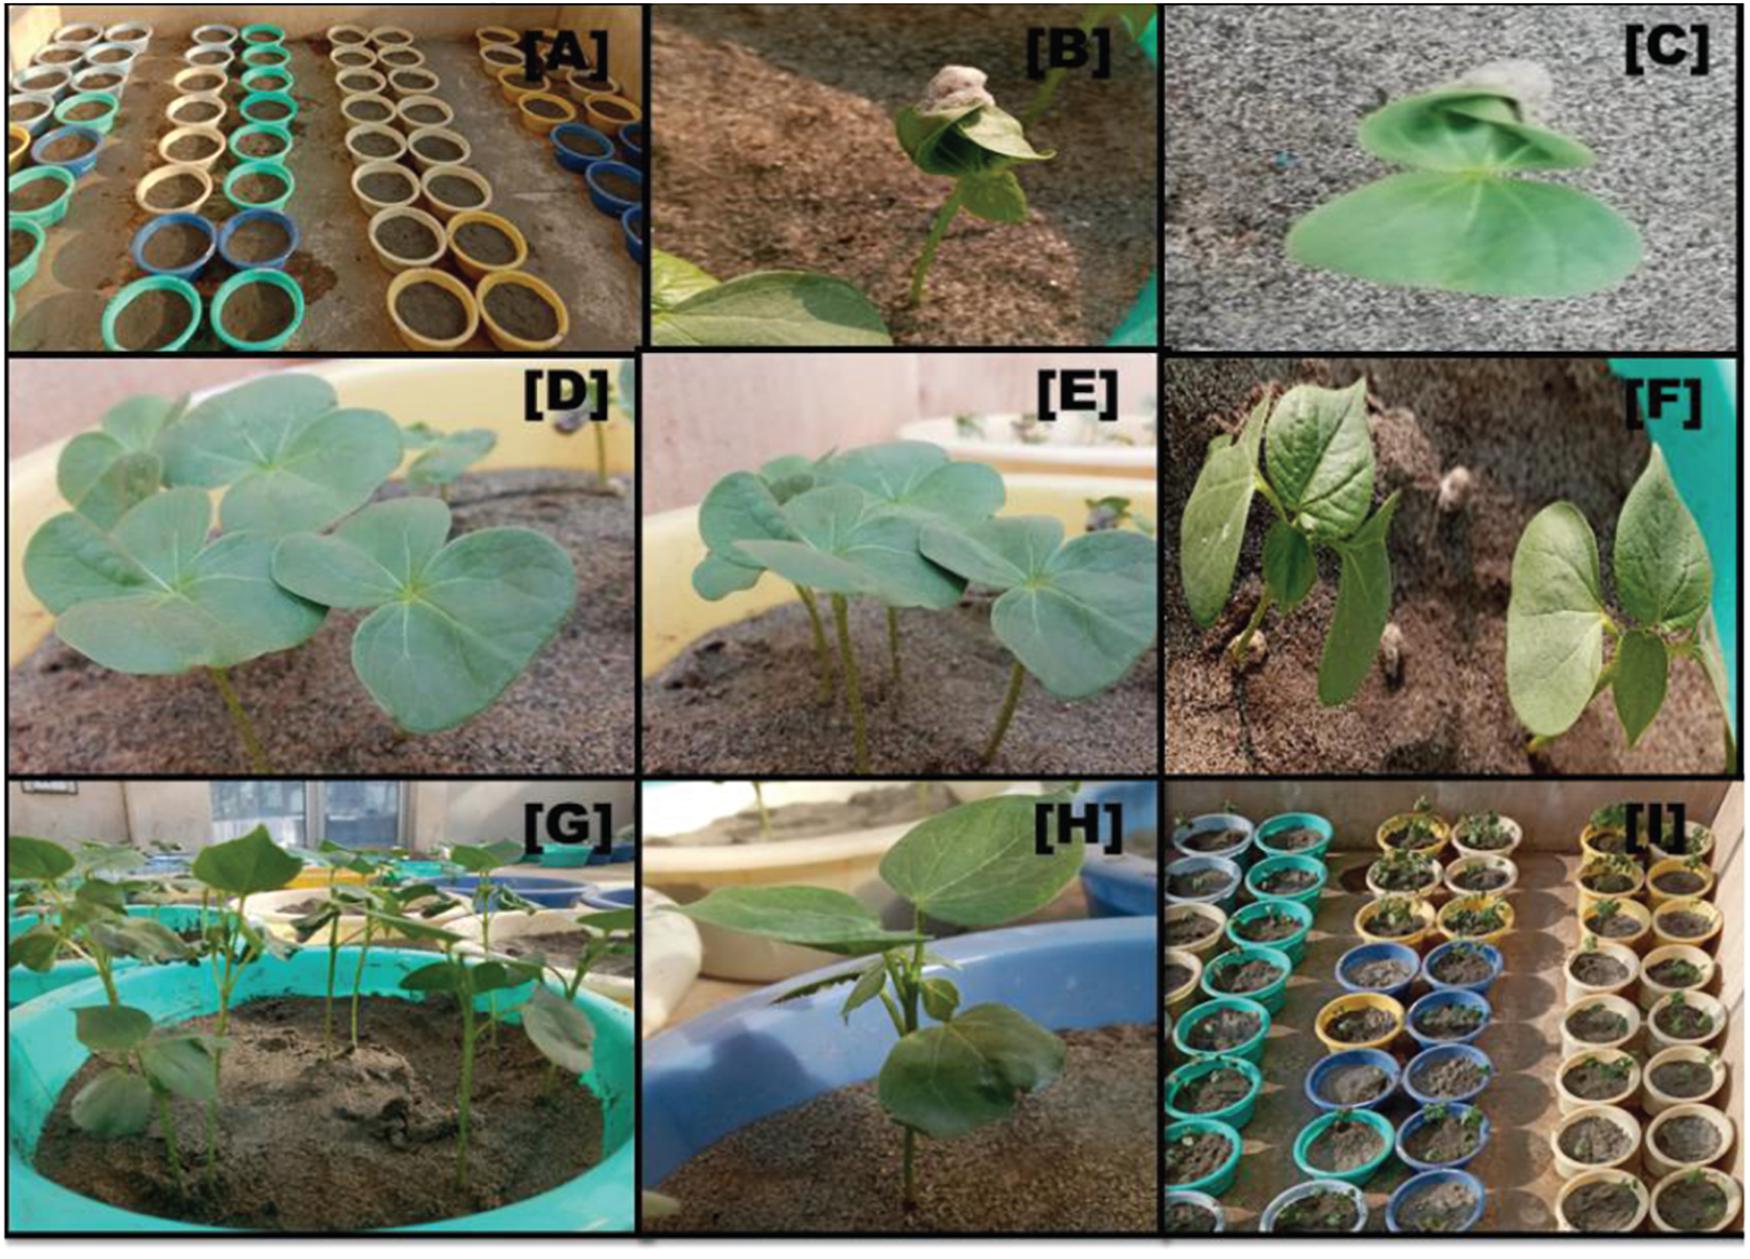 cotton plant growth stages